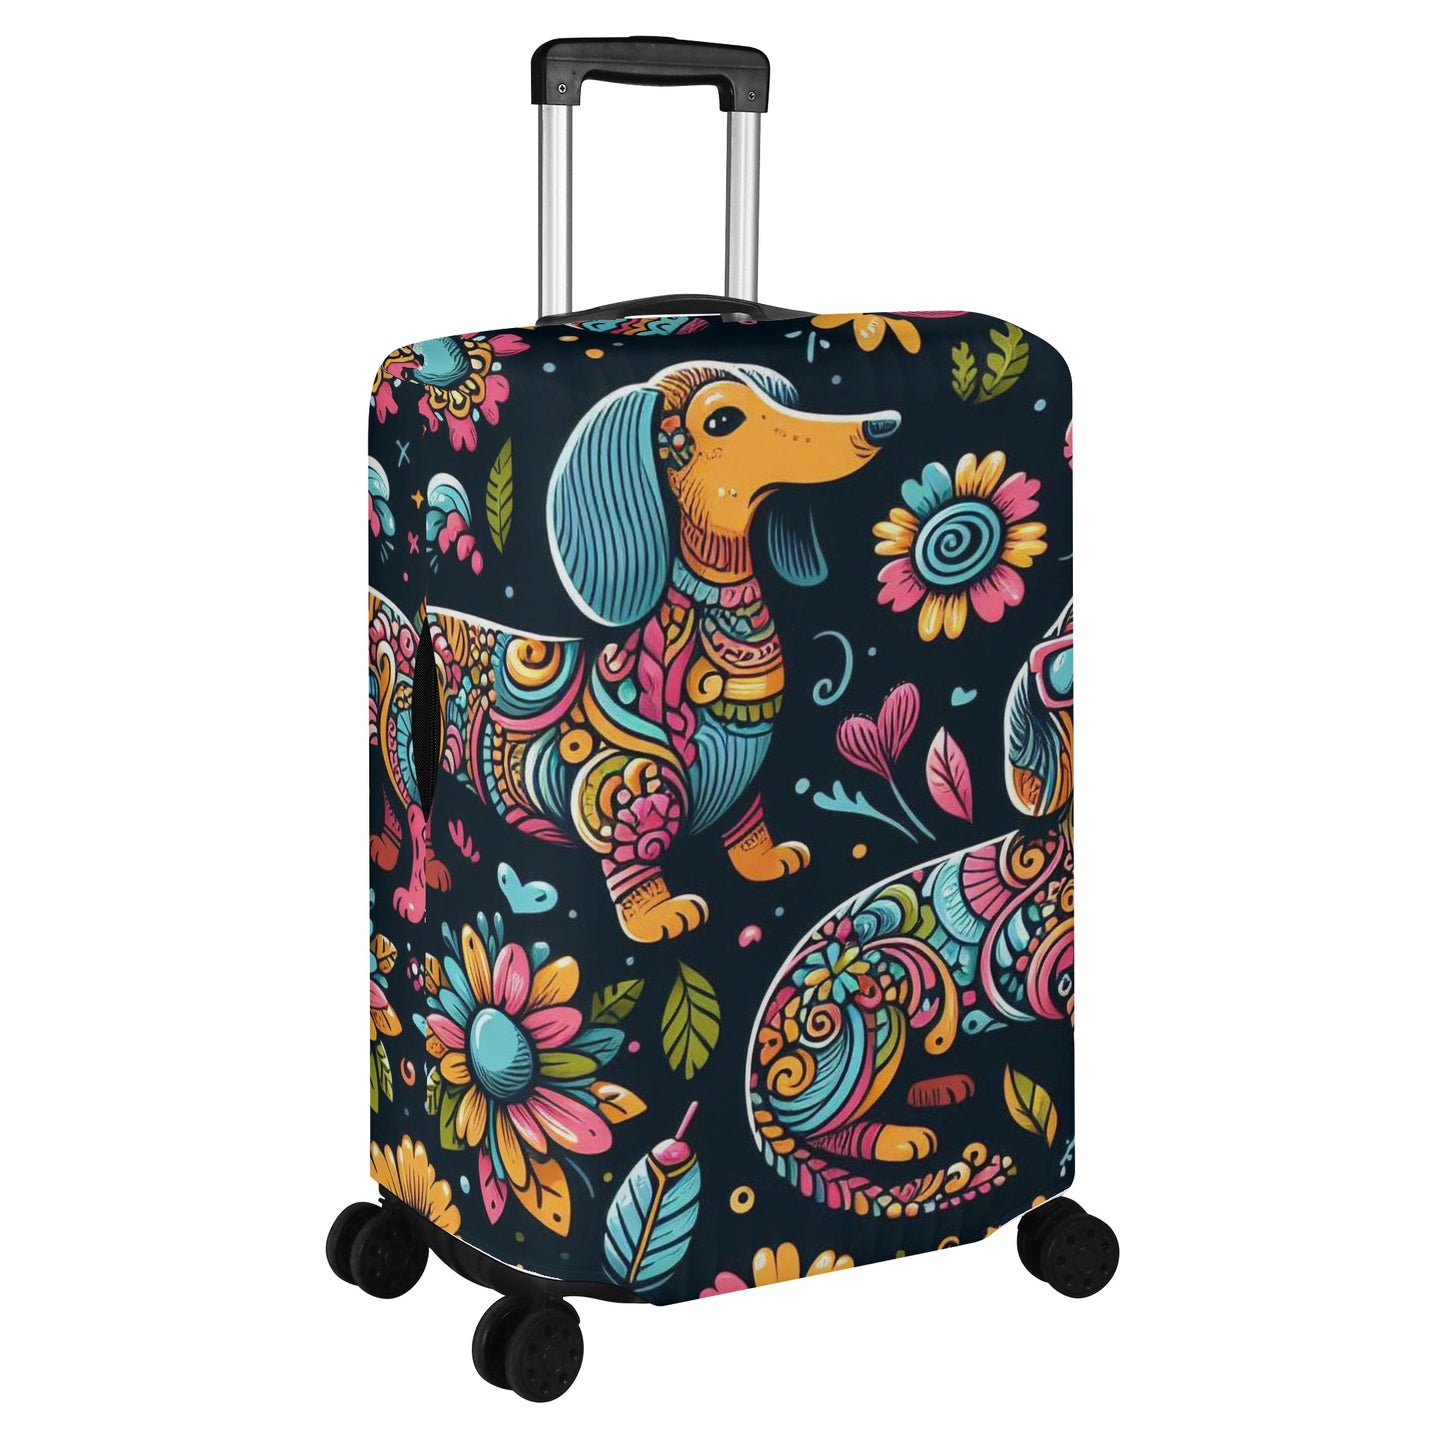 Rudy - Luggage Cover